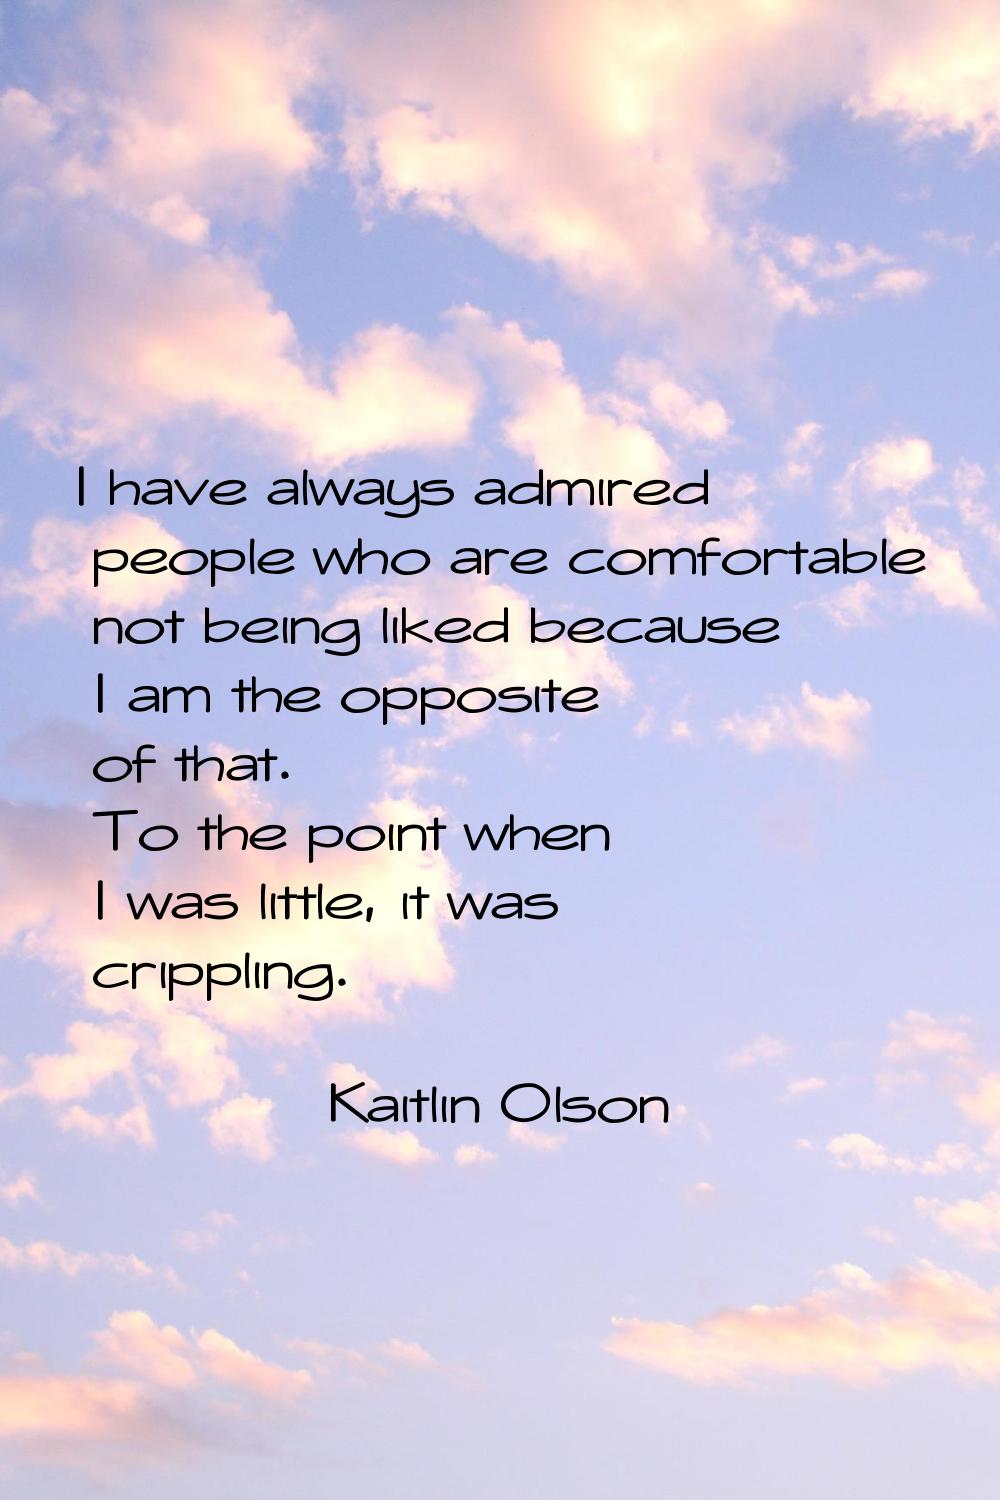 I have always admired people who are comfortable not being liked because I am the opposite of that.